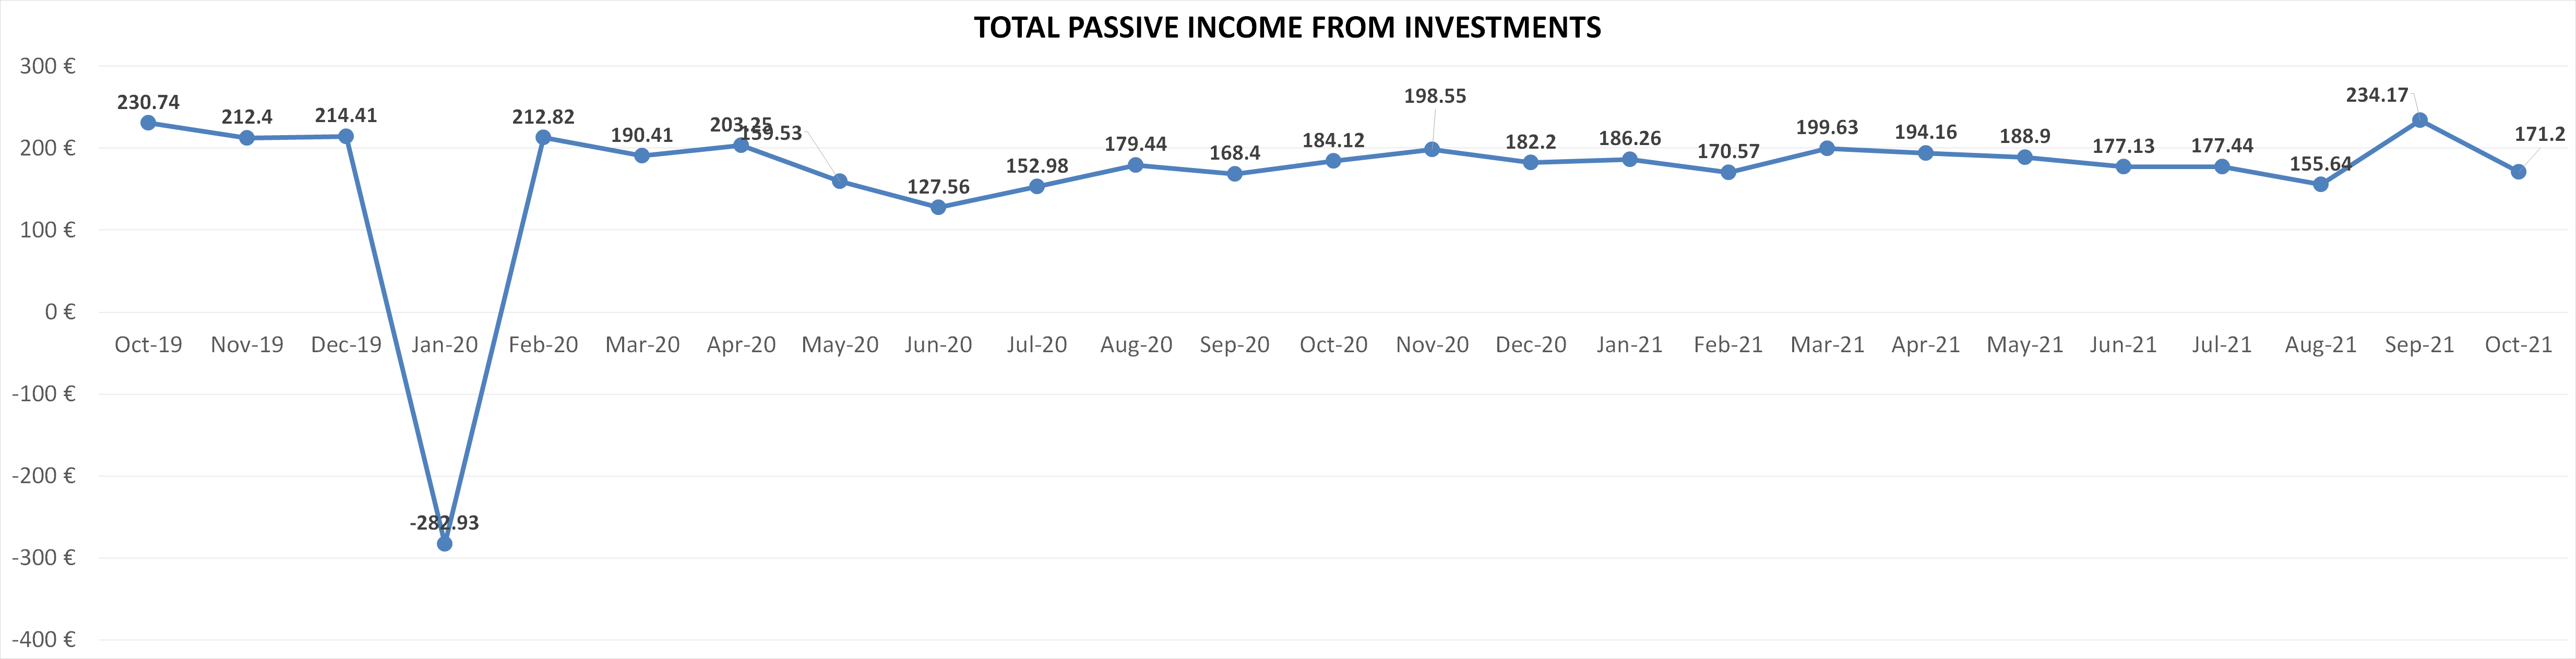 Total passive income from investments october 2021